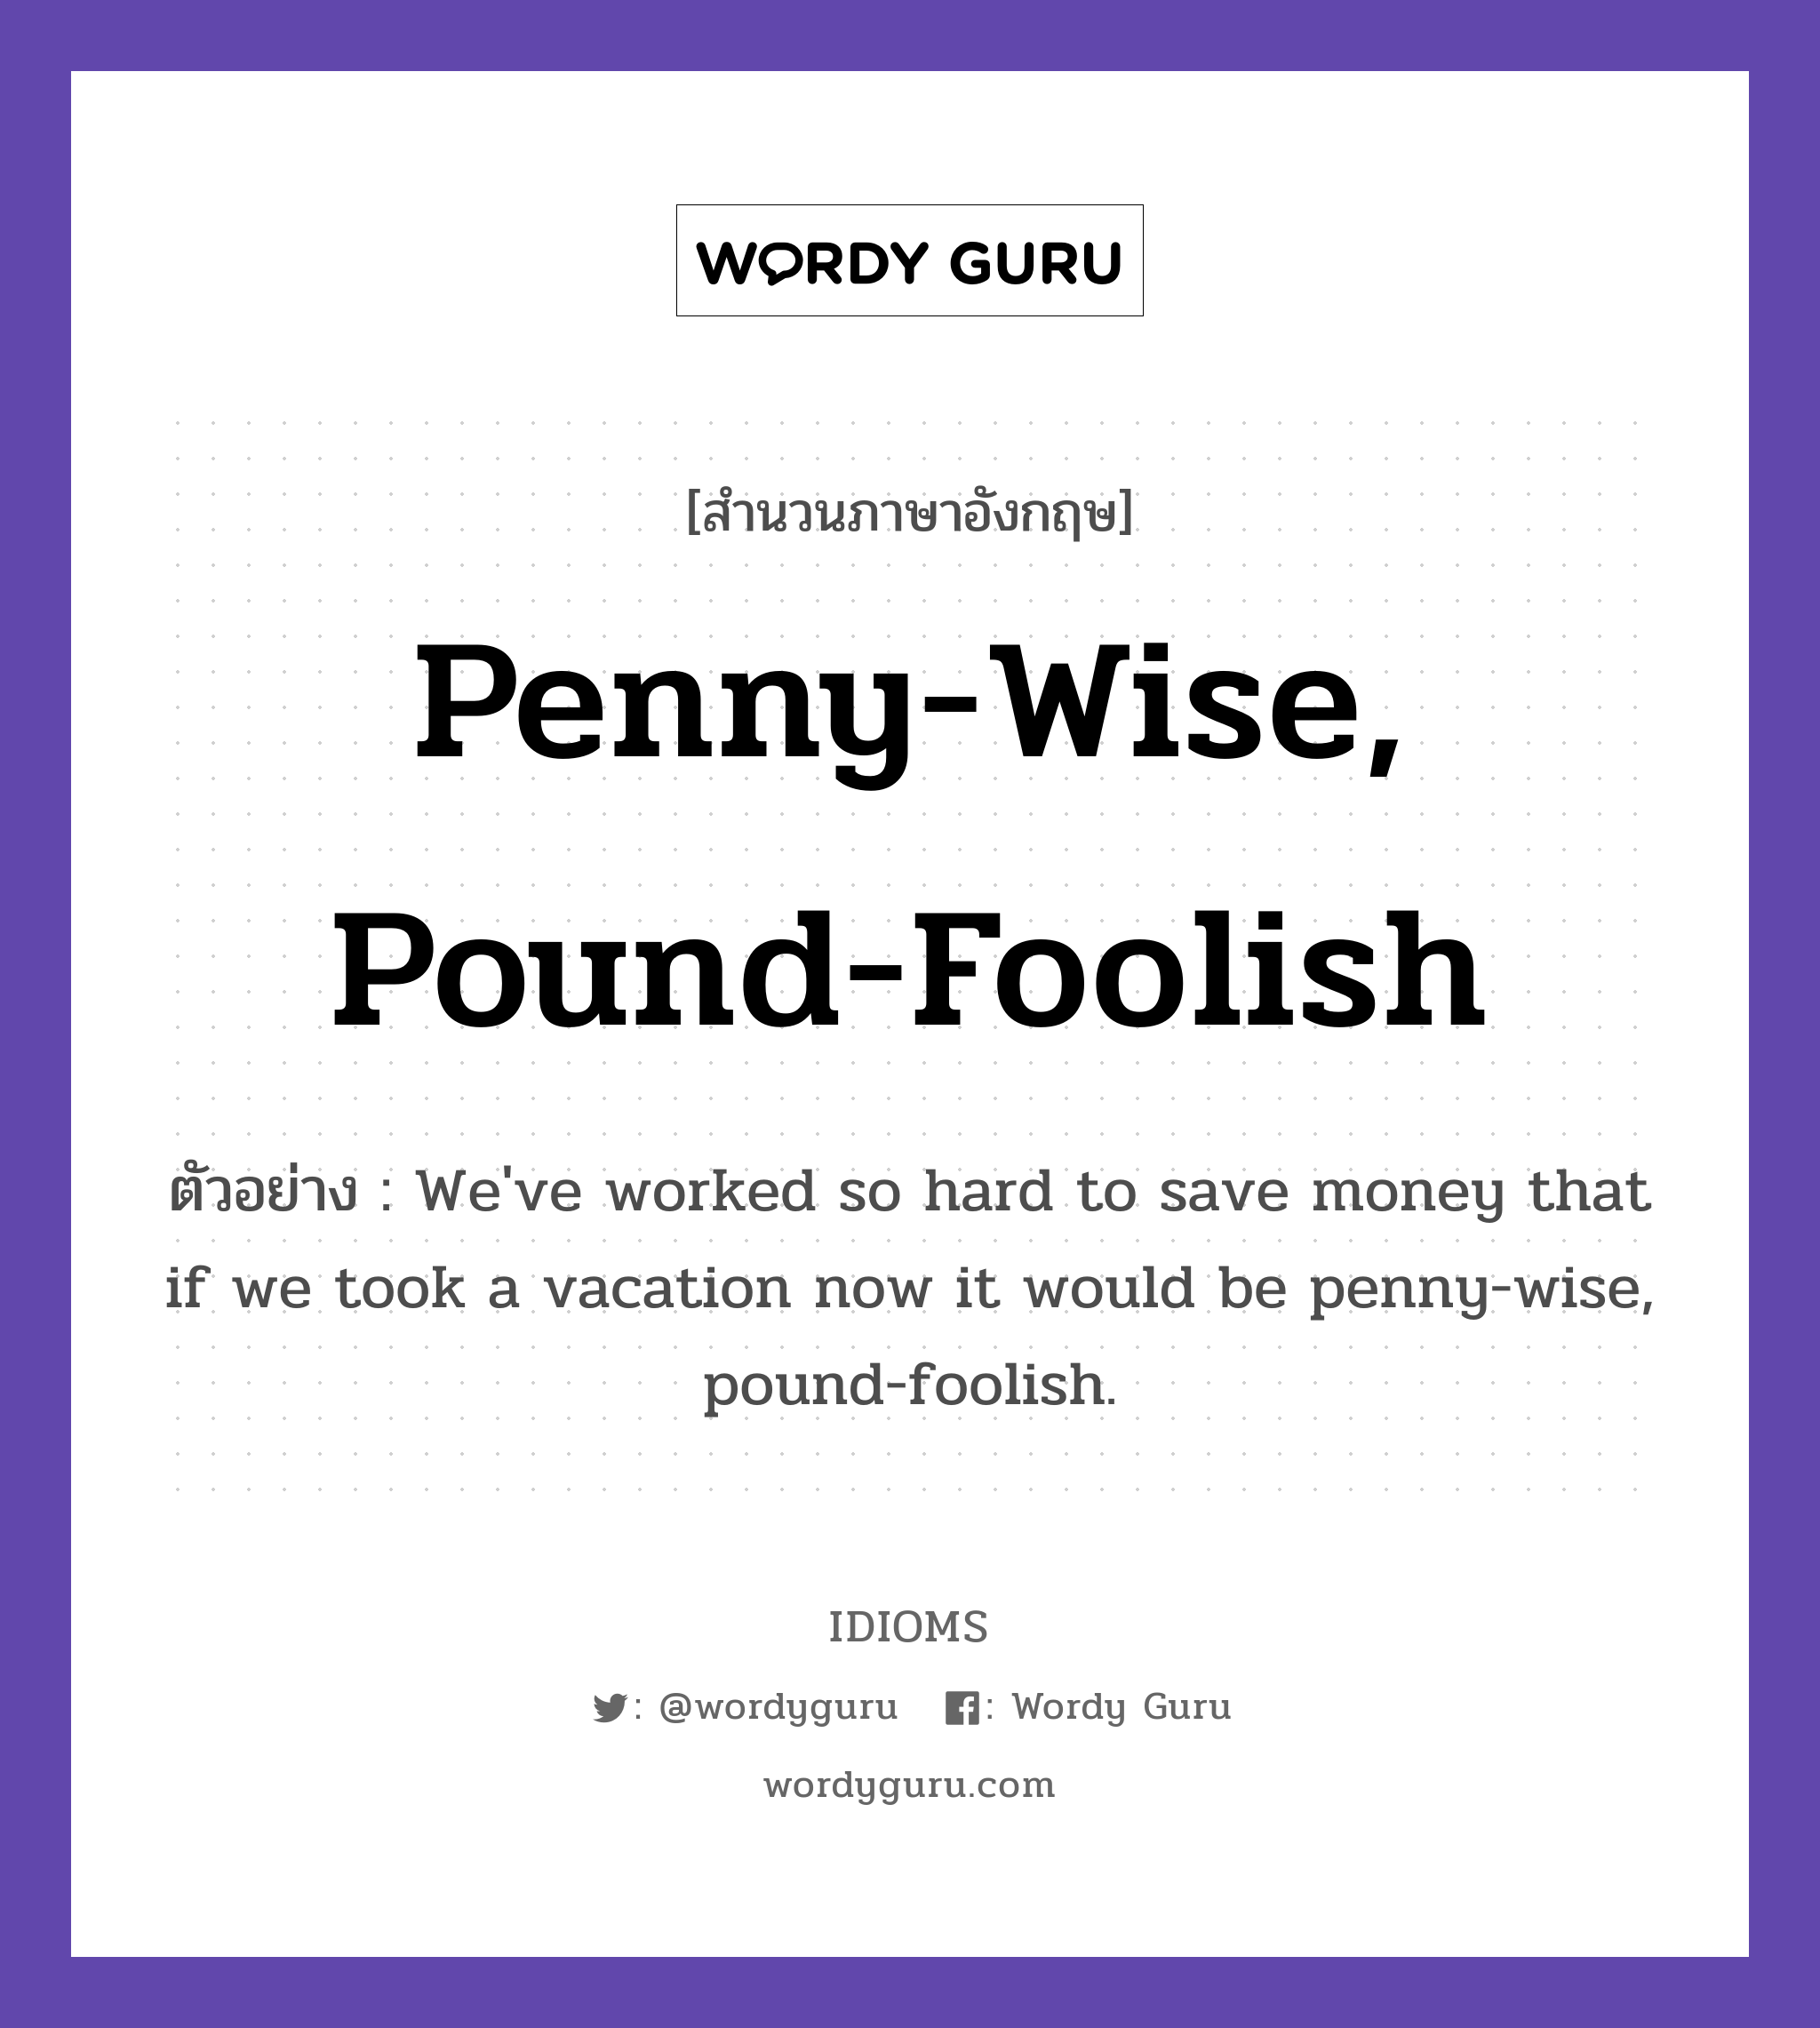 Penny-Wise, Pound-Foolish แปลว่า?, สำนวนภาษาอังกฤษ Penny-Wise, Pound-Foolish ตัวอย่าง We've worked so hard to save money that if we took a vacation now it would be penny-wise, pound-foolish.